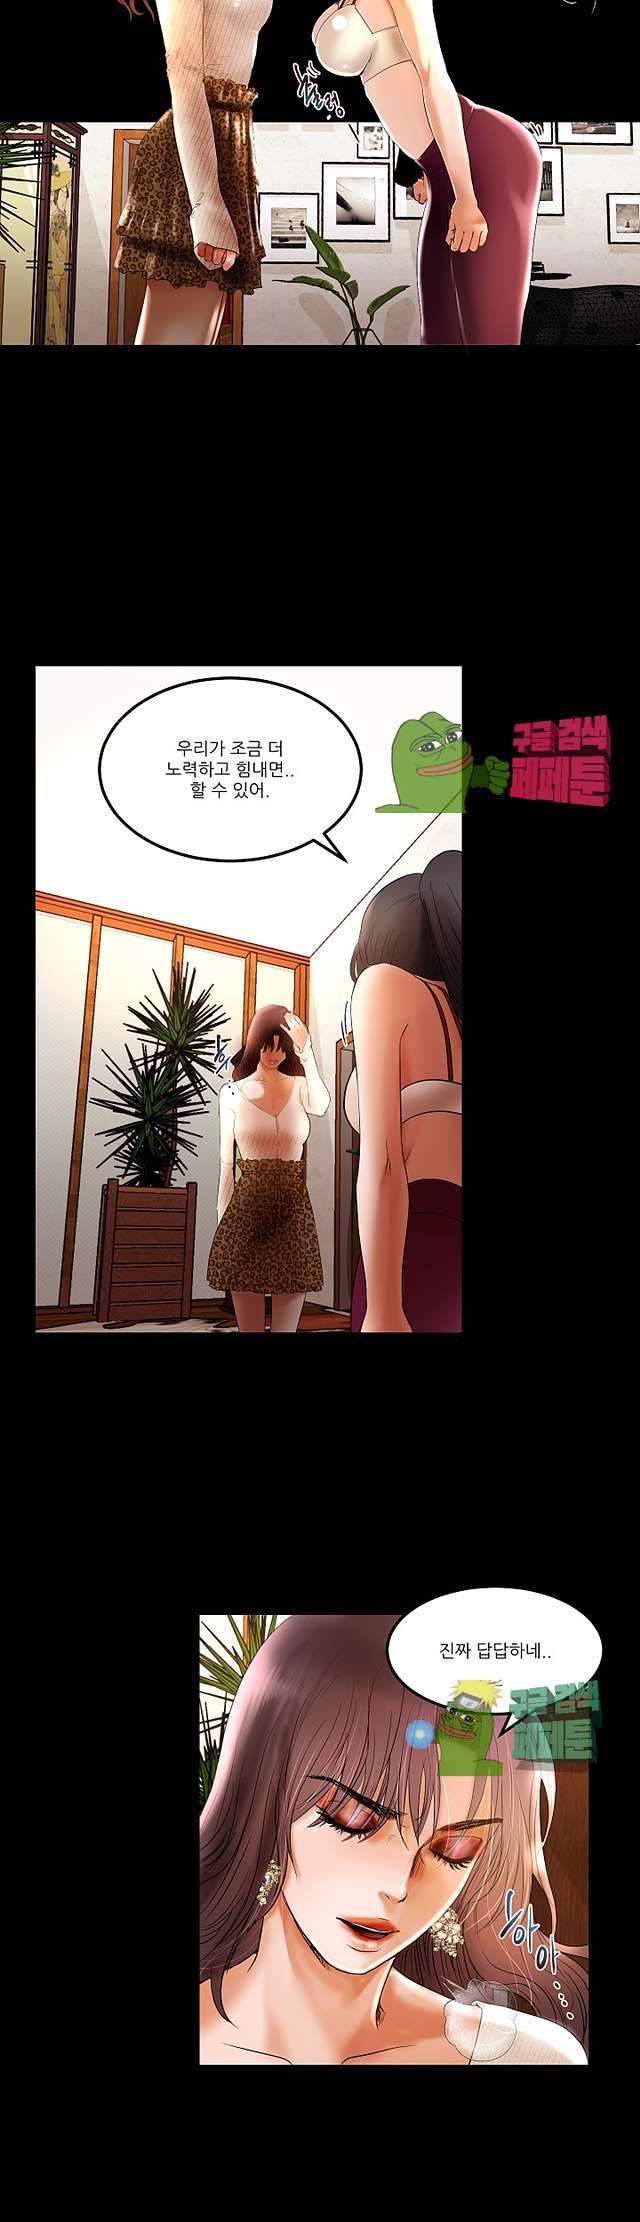 Starballoon Raw - Chapter 3 Page 21